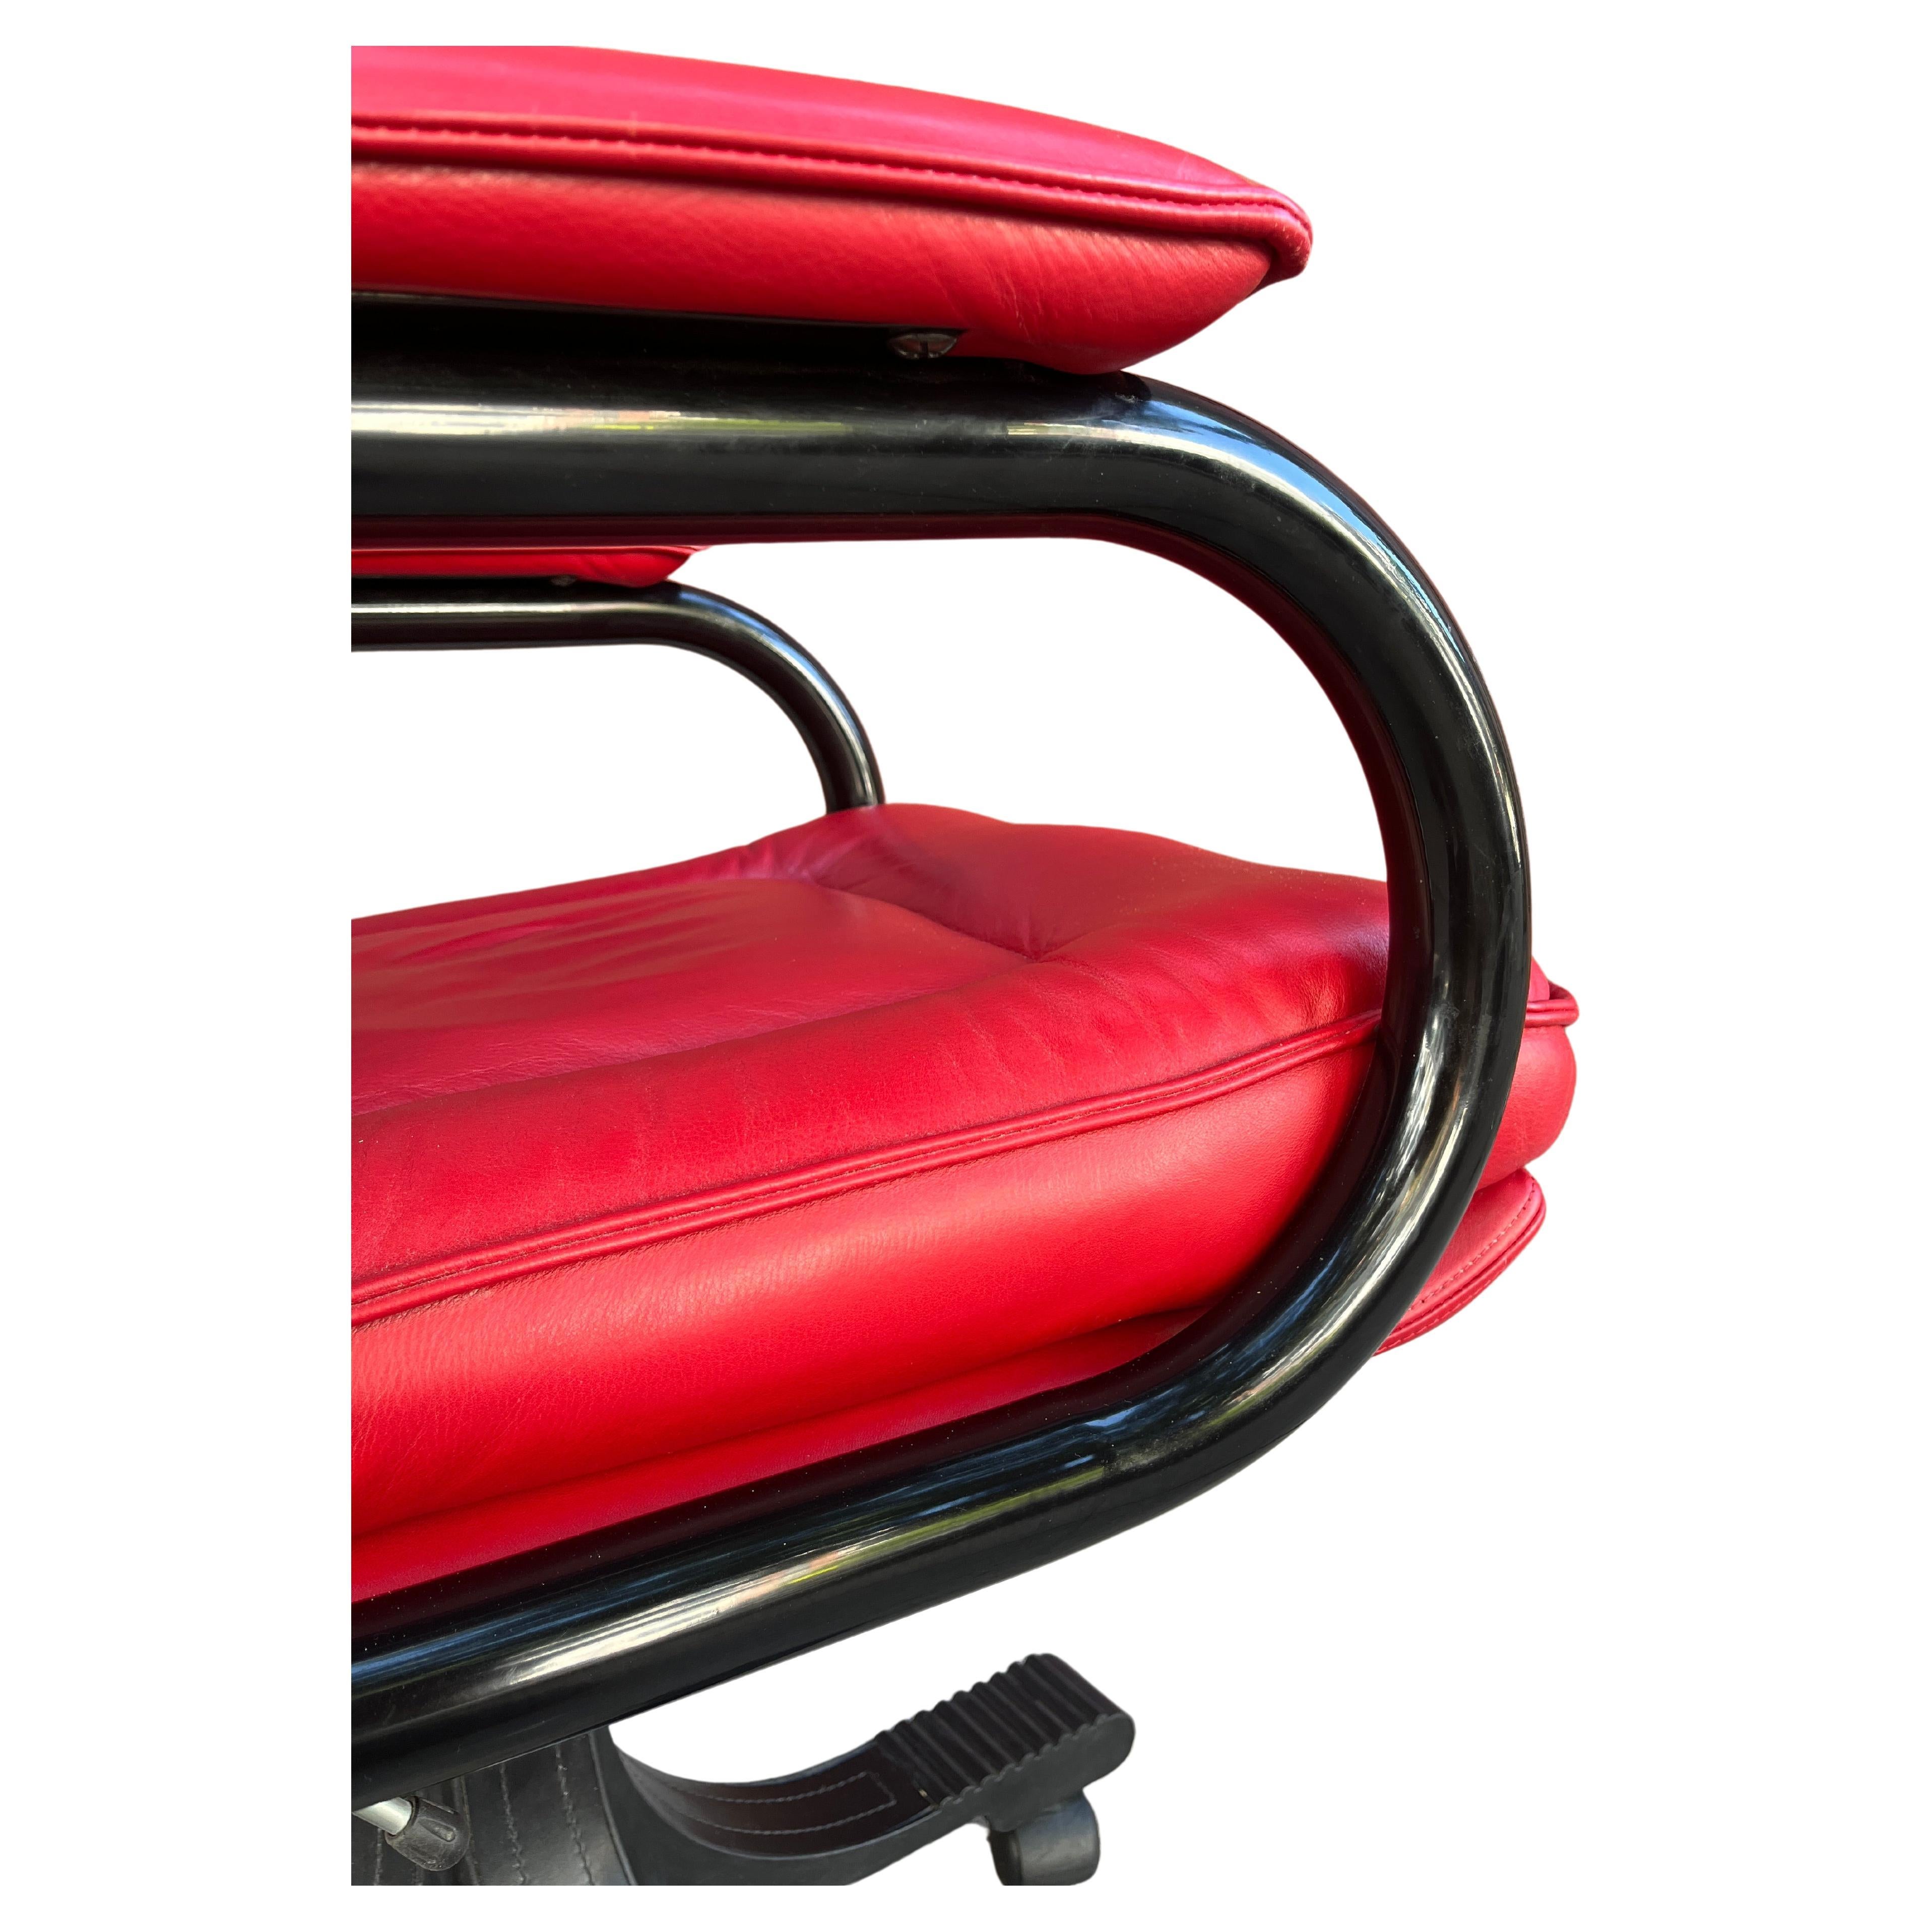 Butter soft red leather  surrounds this amazing Guido Faleschini swivel management soft pad chair. Designed for i4 Mariani and retailed in the 1970s and 1980s by The Pace Collection. Underneath the chair is a telescoping mechanism to raise/lower the